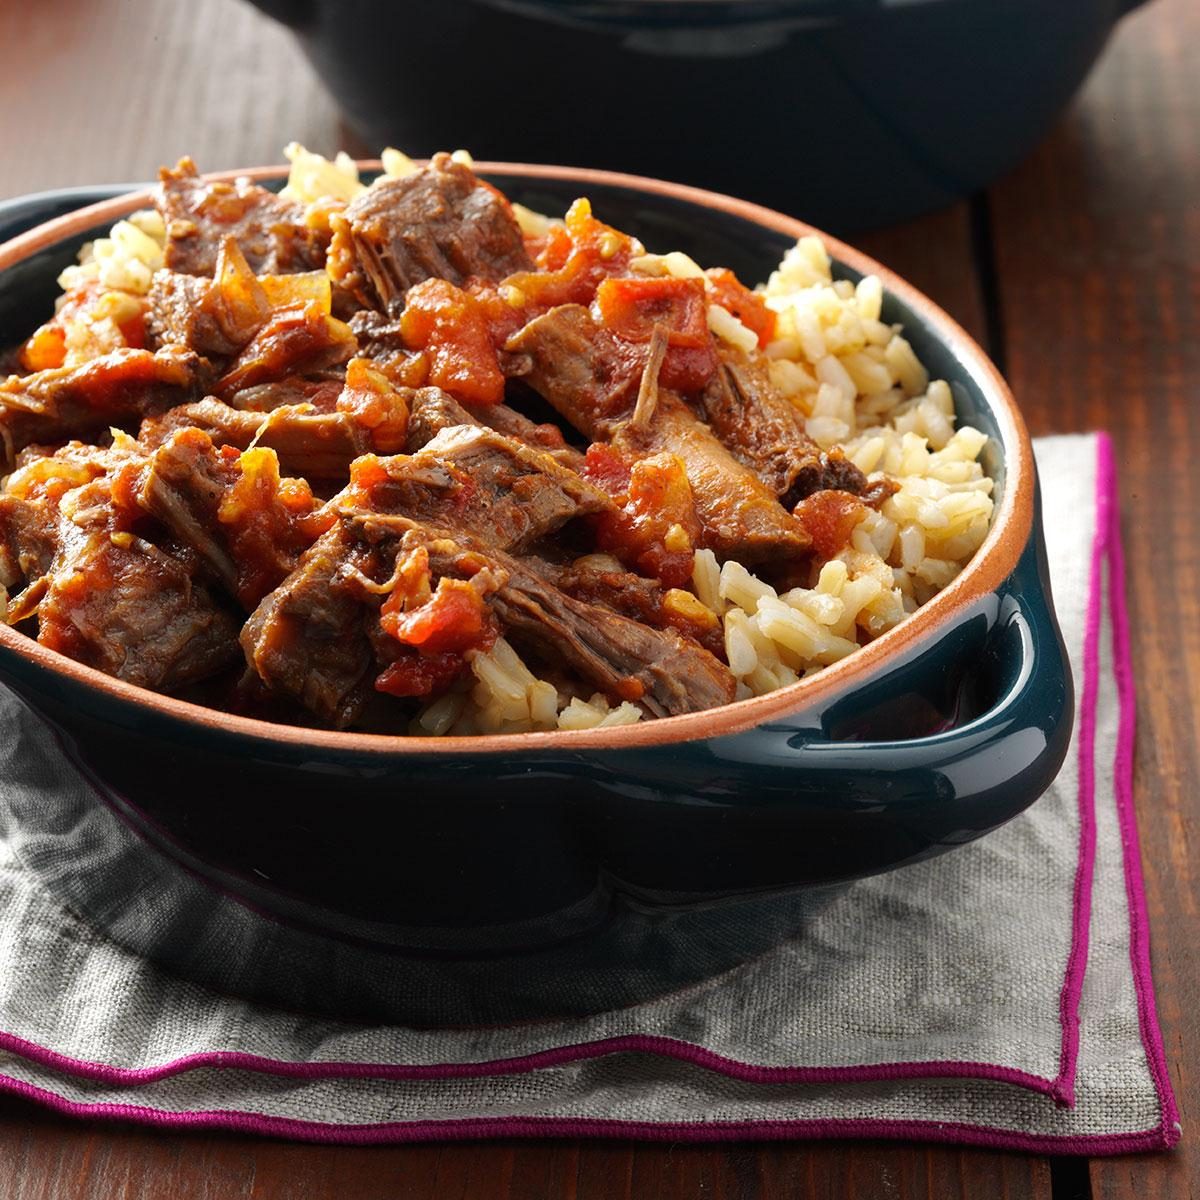 We Tried the Crockpot Lunch Warmer. Here's Why It's Worth the Hype